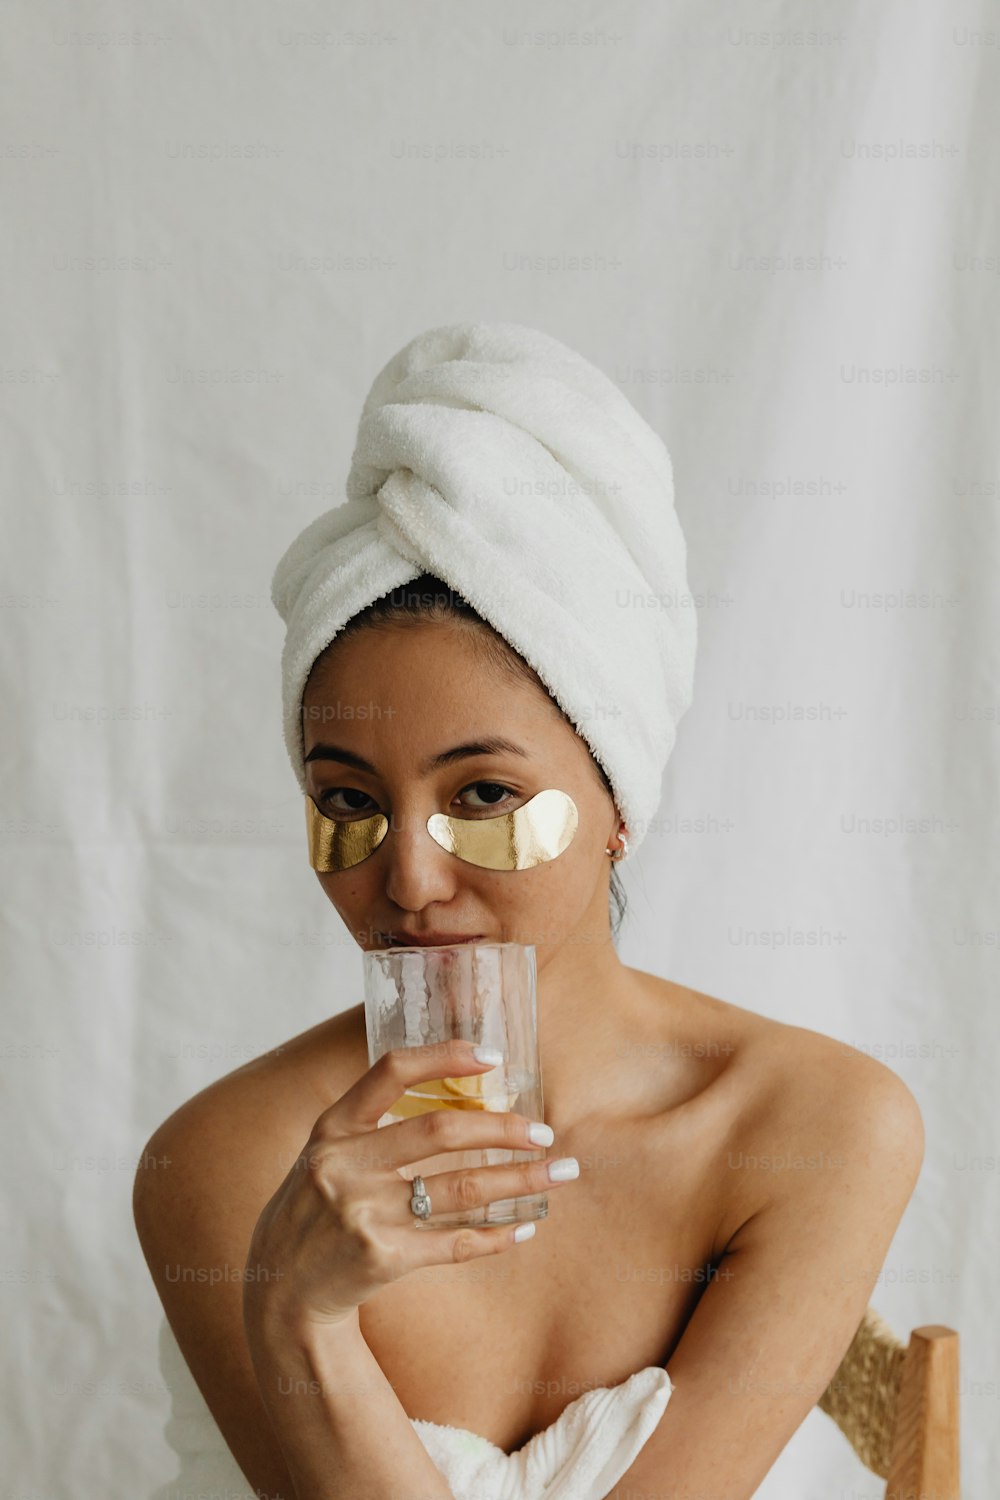 a woman with a towel on her head holding a glass